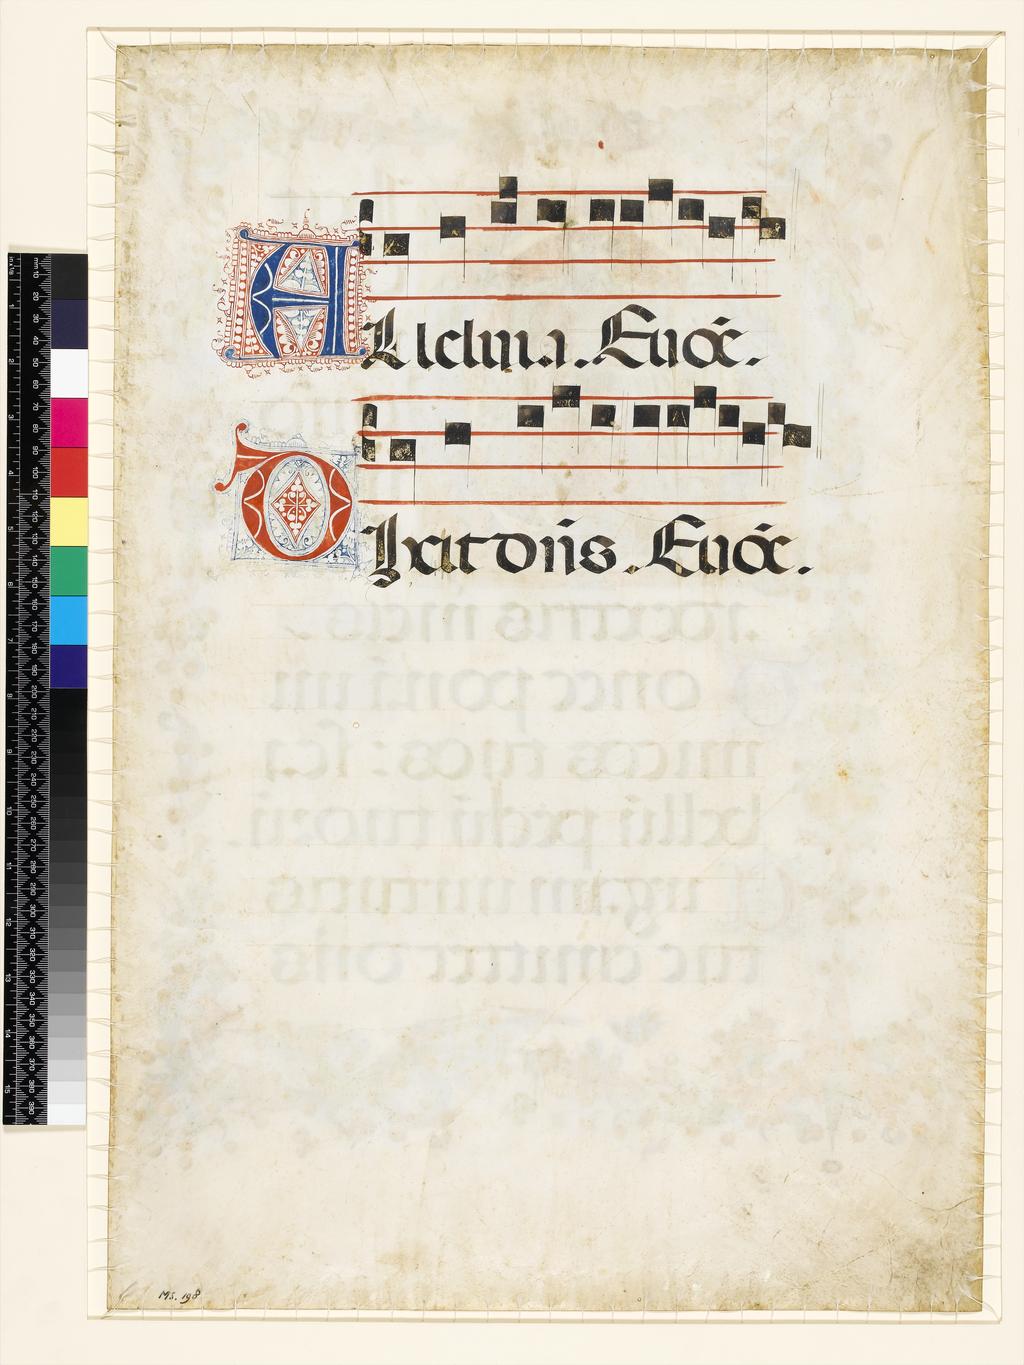 An image of Illuminated Manuscript. Leaf from a set of Choir books. Pietro, Sano di. Rossini, Pellegrino di Mariano. Parchment, gold, 588 x 400 mm (360 x 235 mm) 23 long lines, ruled in ink and accommodating two lines of text and two four-line musical staves ruled in red ink on the original recto of the leaf, and twelve lines of text on the original verso, circa 1460 to circa 1477. Production Place: Italy, Siena.CONTENTS: On reverse (original recto): two musical staves and two lines of text containing the Antiphon for the first psalm of the first nocturn of Vespers for a Sunday in the Easter season, Aleluia. Euoue Dixit dominus [Domino meo sede a dextris meis] Euoue; the initial, which would have been on the original verso, introduced Ps. 109:1-2, Dixit dominus domino meo…virgam virtutis tuae emittet dominus. DECORATION: Historiated initial in graded blue on burnished gold ground, with acanthus leaves extending into full borders containing birds, putti and gold balls: Ps 109:1, [D, 11 ll.] King David enthroned, flanked by two attendants, and trampling on an enemy. ORNAMENTATION: Alternate blue and red penwork initials [2-4 ll.] with reserved ornament, and red and blue pen-flourished infill and frames.